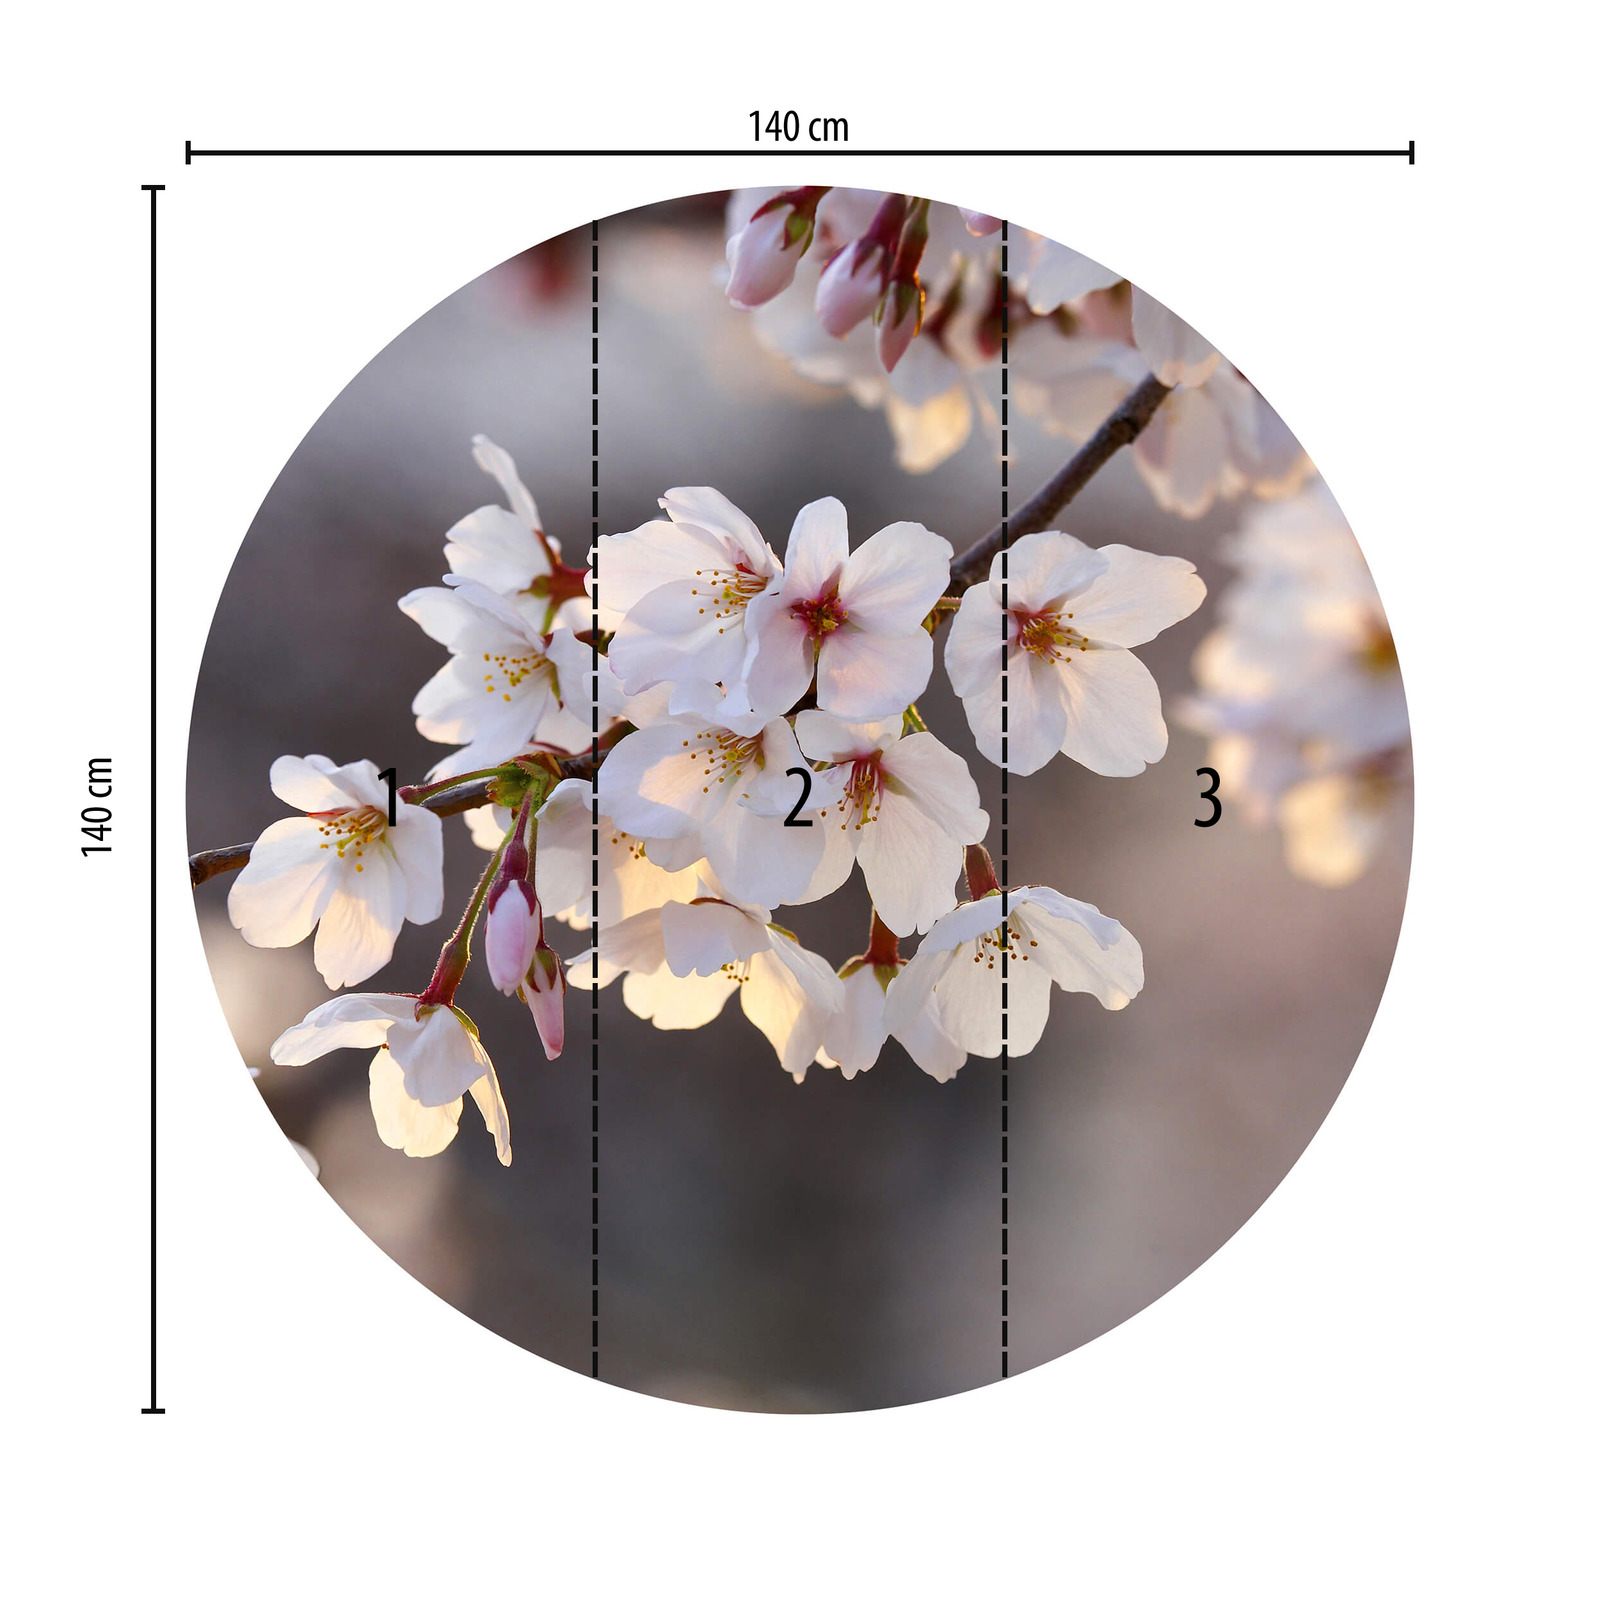             Round photo wallpaper cherry blossoms in pink & white
        